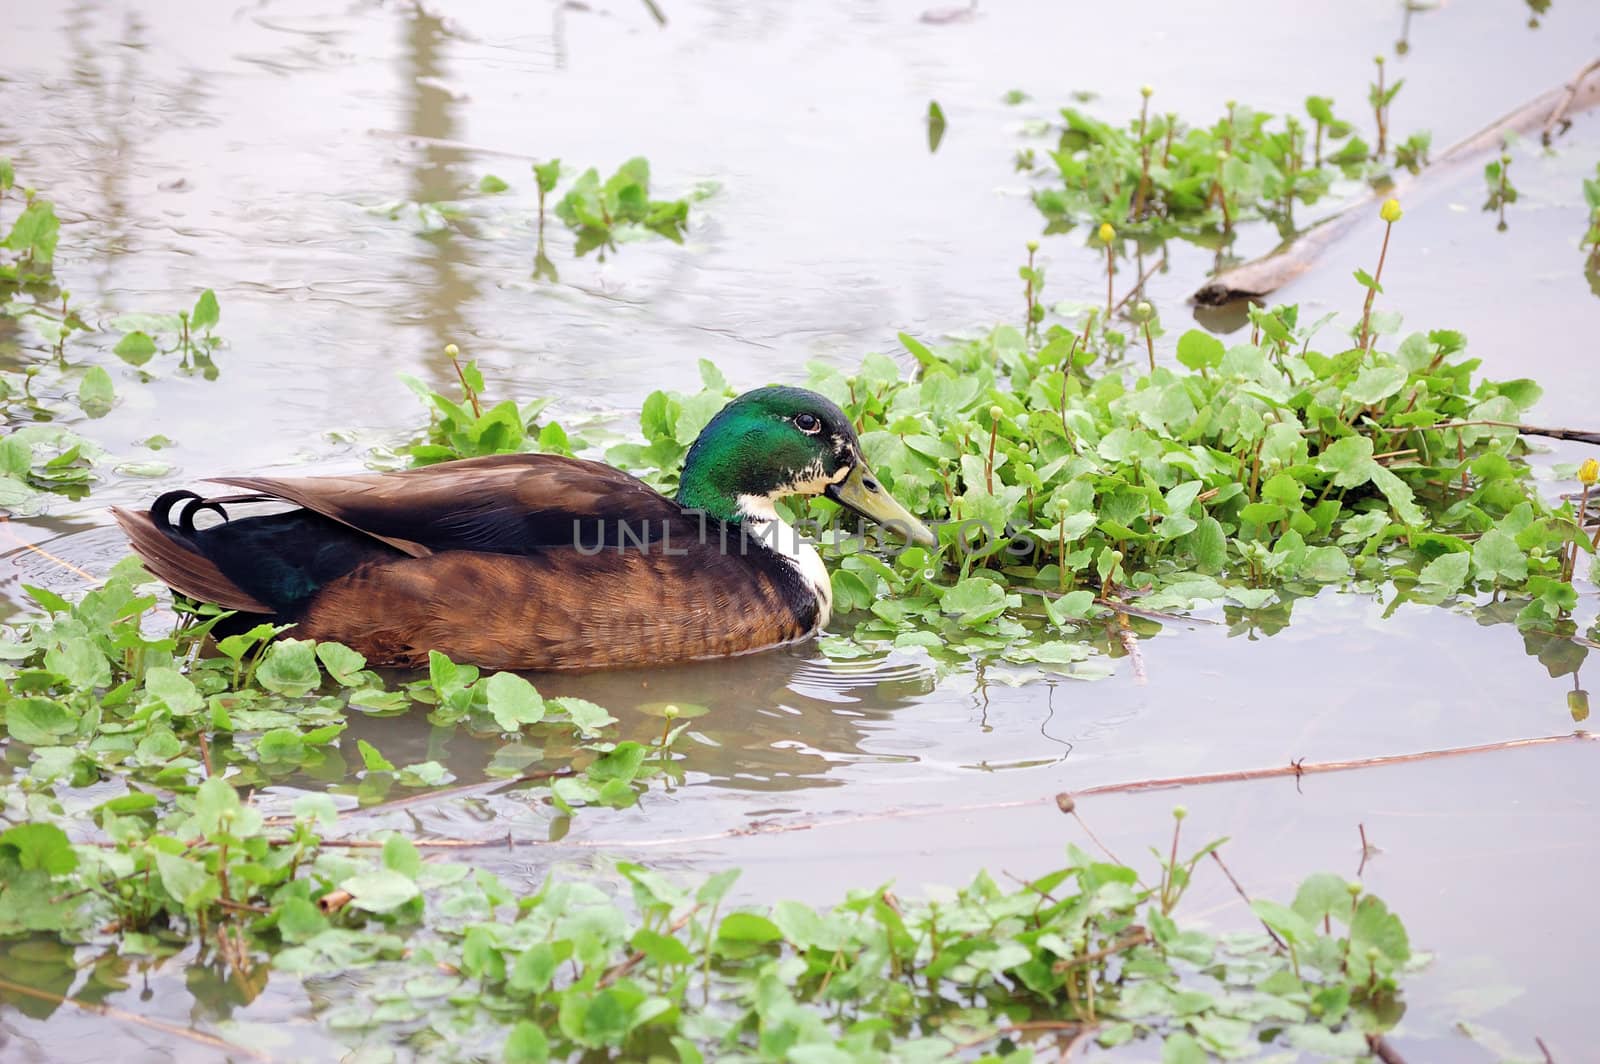 A duck swimming in a pond with plants.